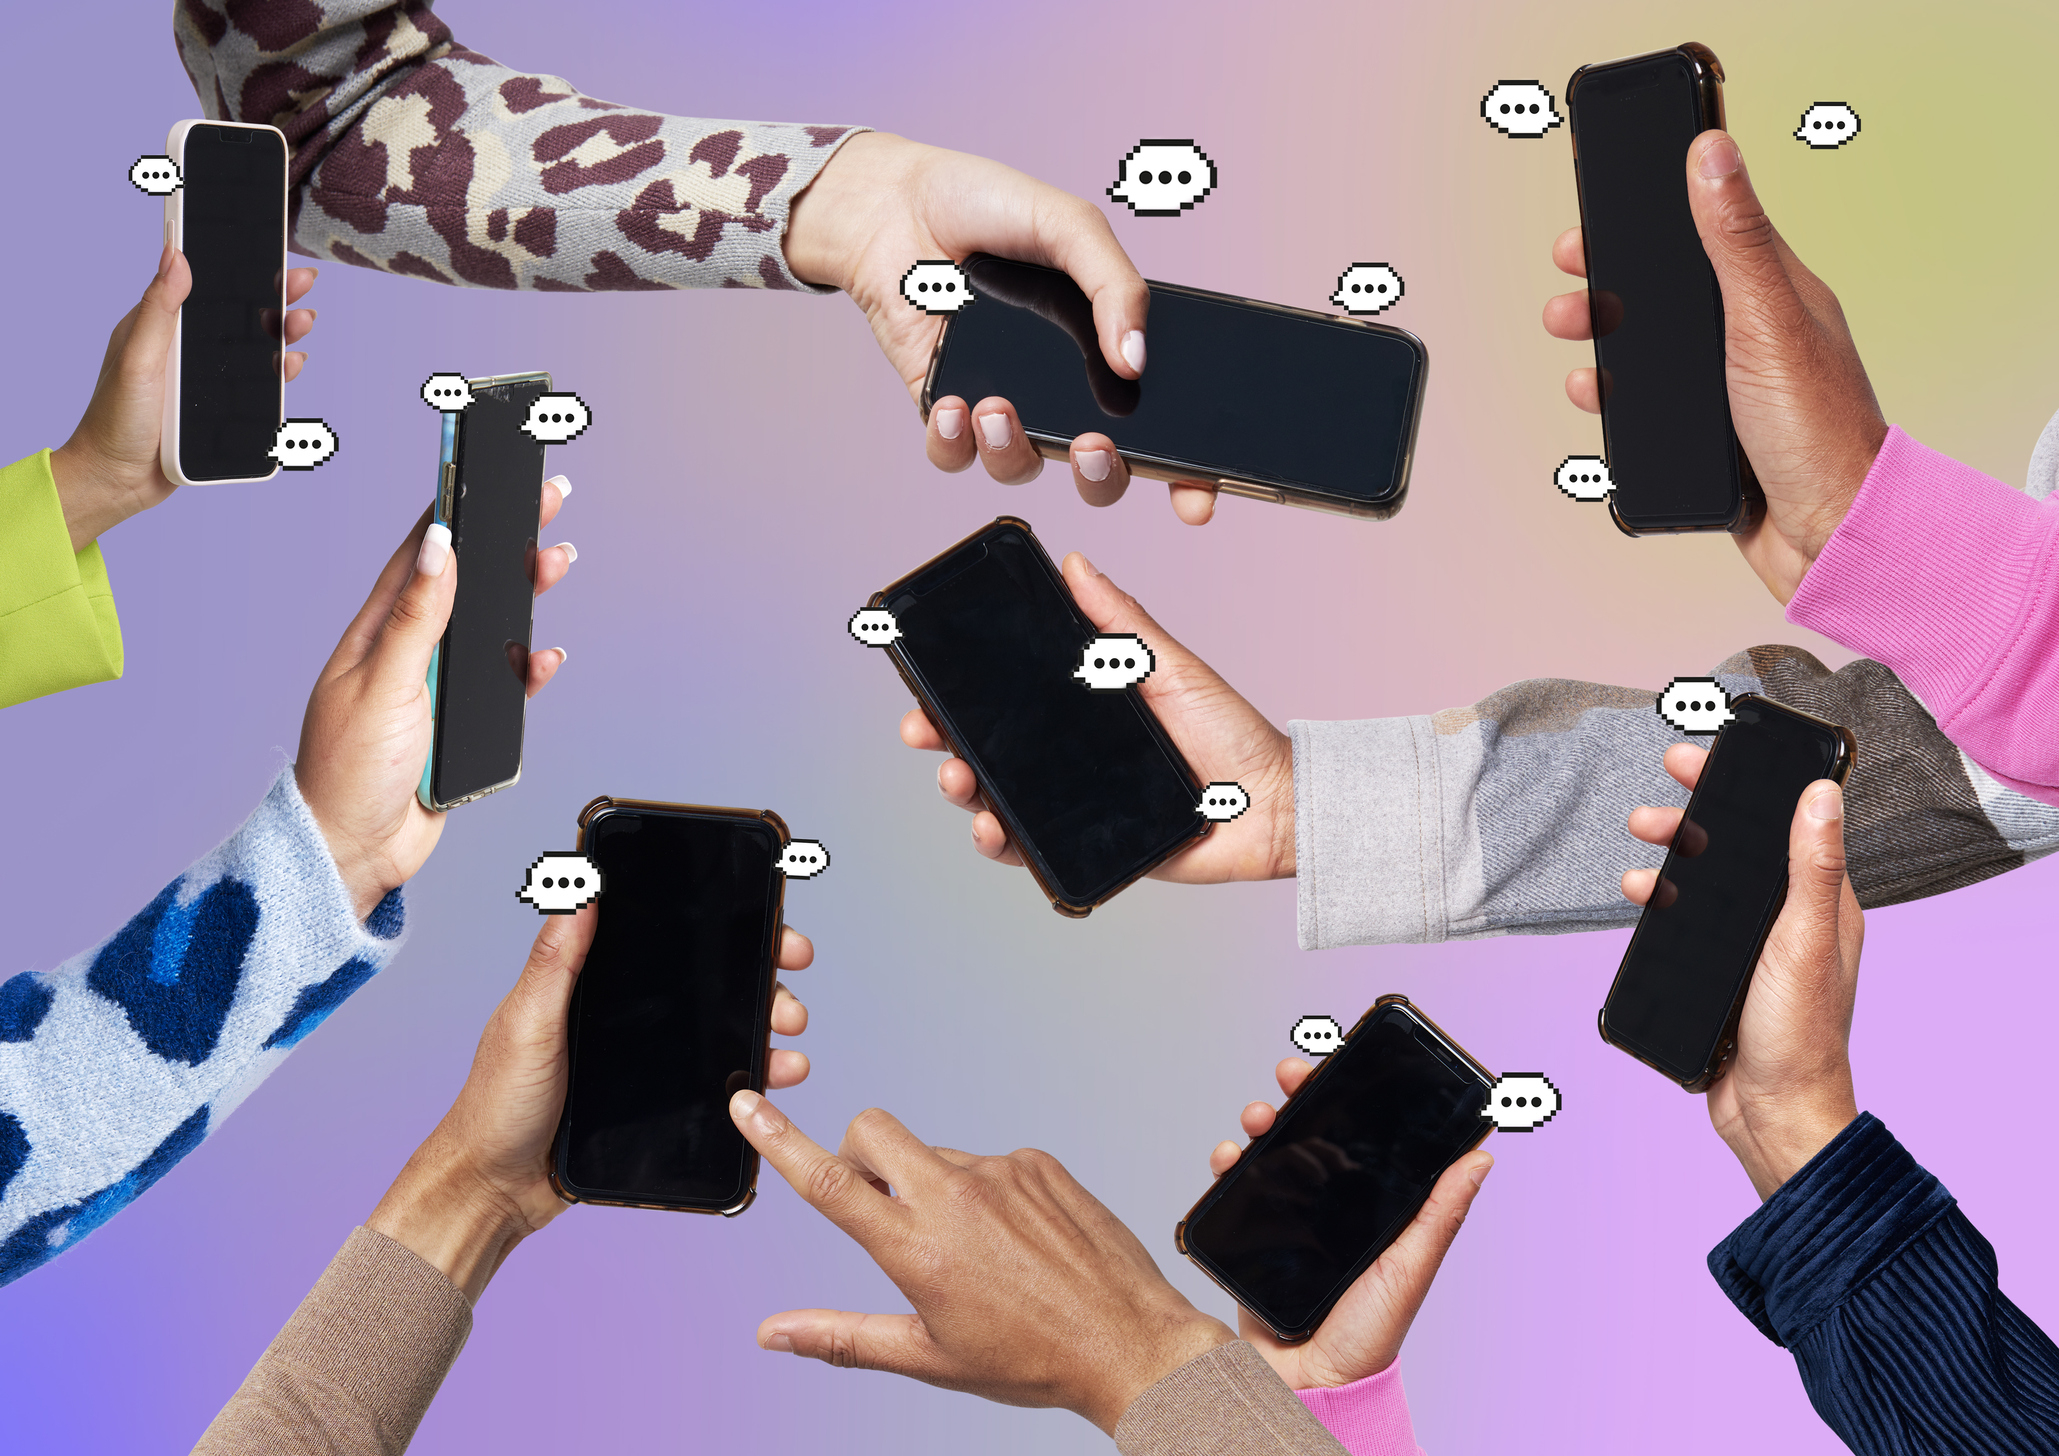 Many hands holding cellphones with &quot;chat bubbles&quot; around each phone